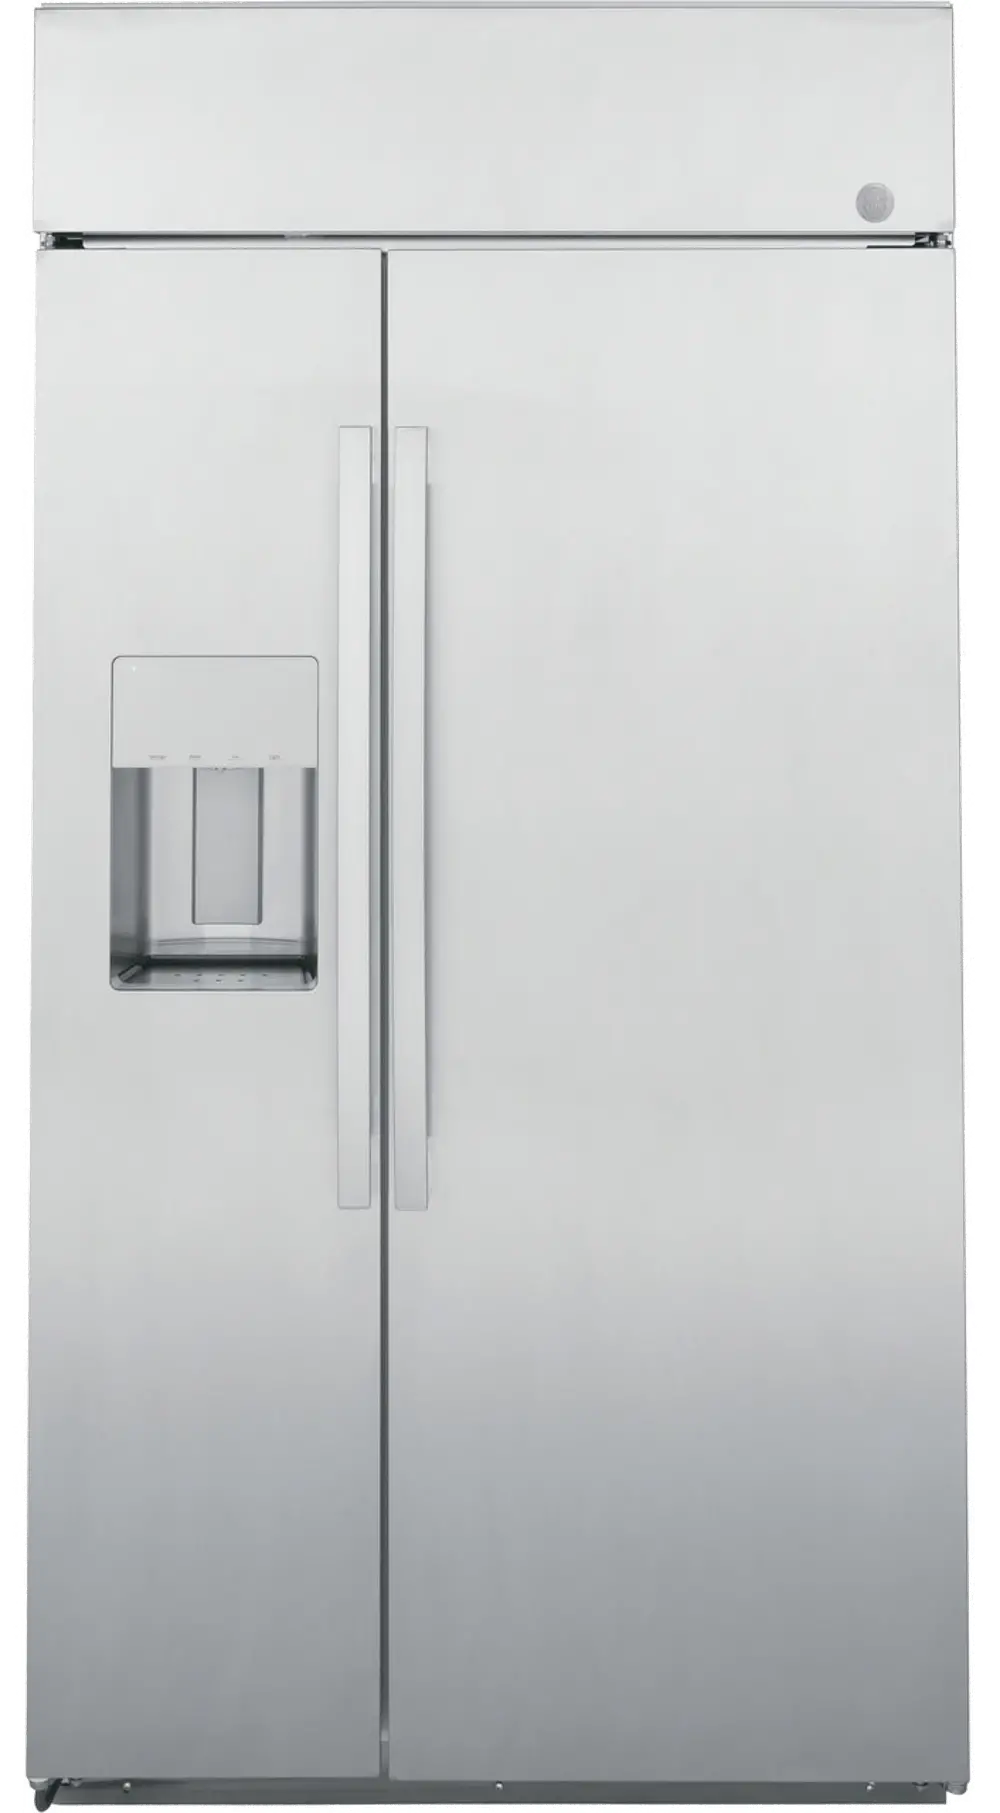 PSB42YSNSS GE Profile 24.3 cu ft Built In Side by Side Smart Refrigerator - 42 W Stainless Steel-1